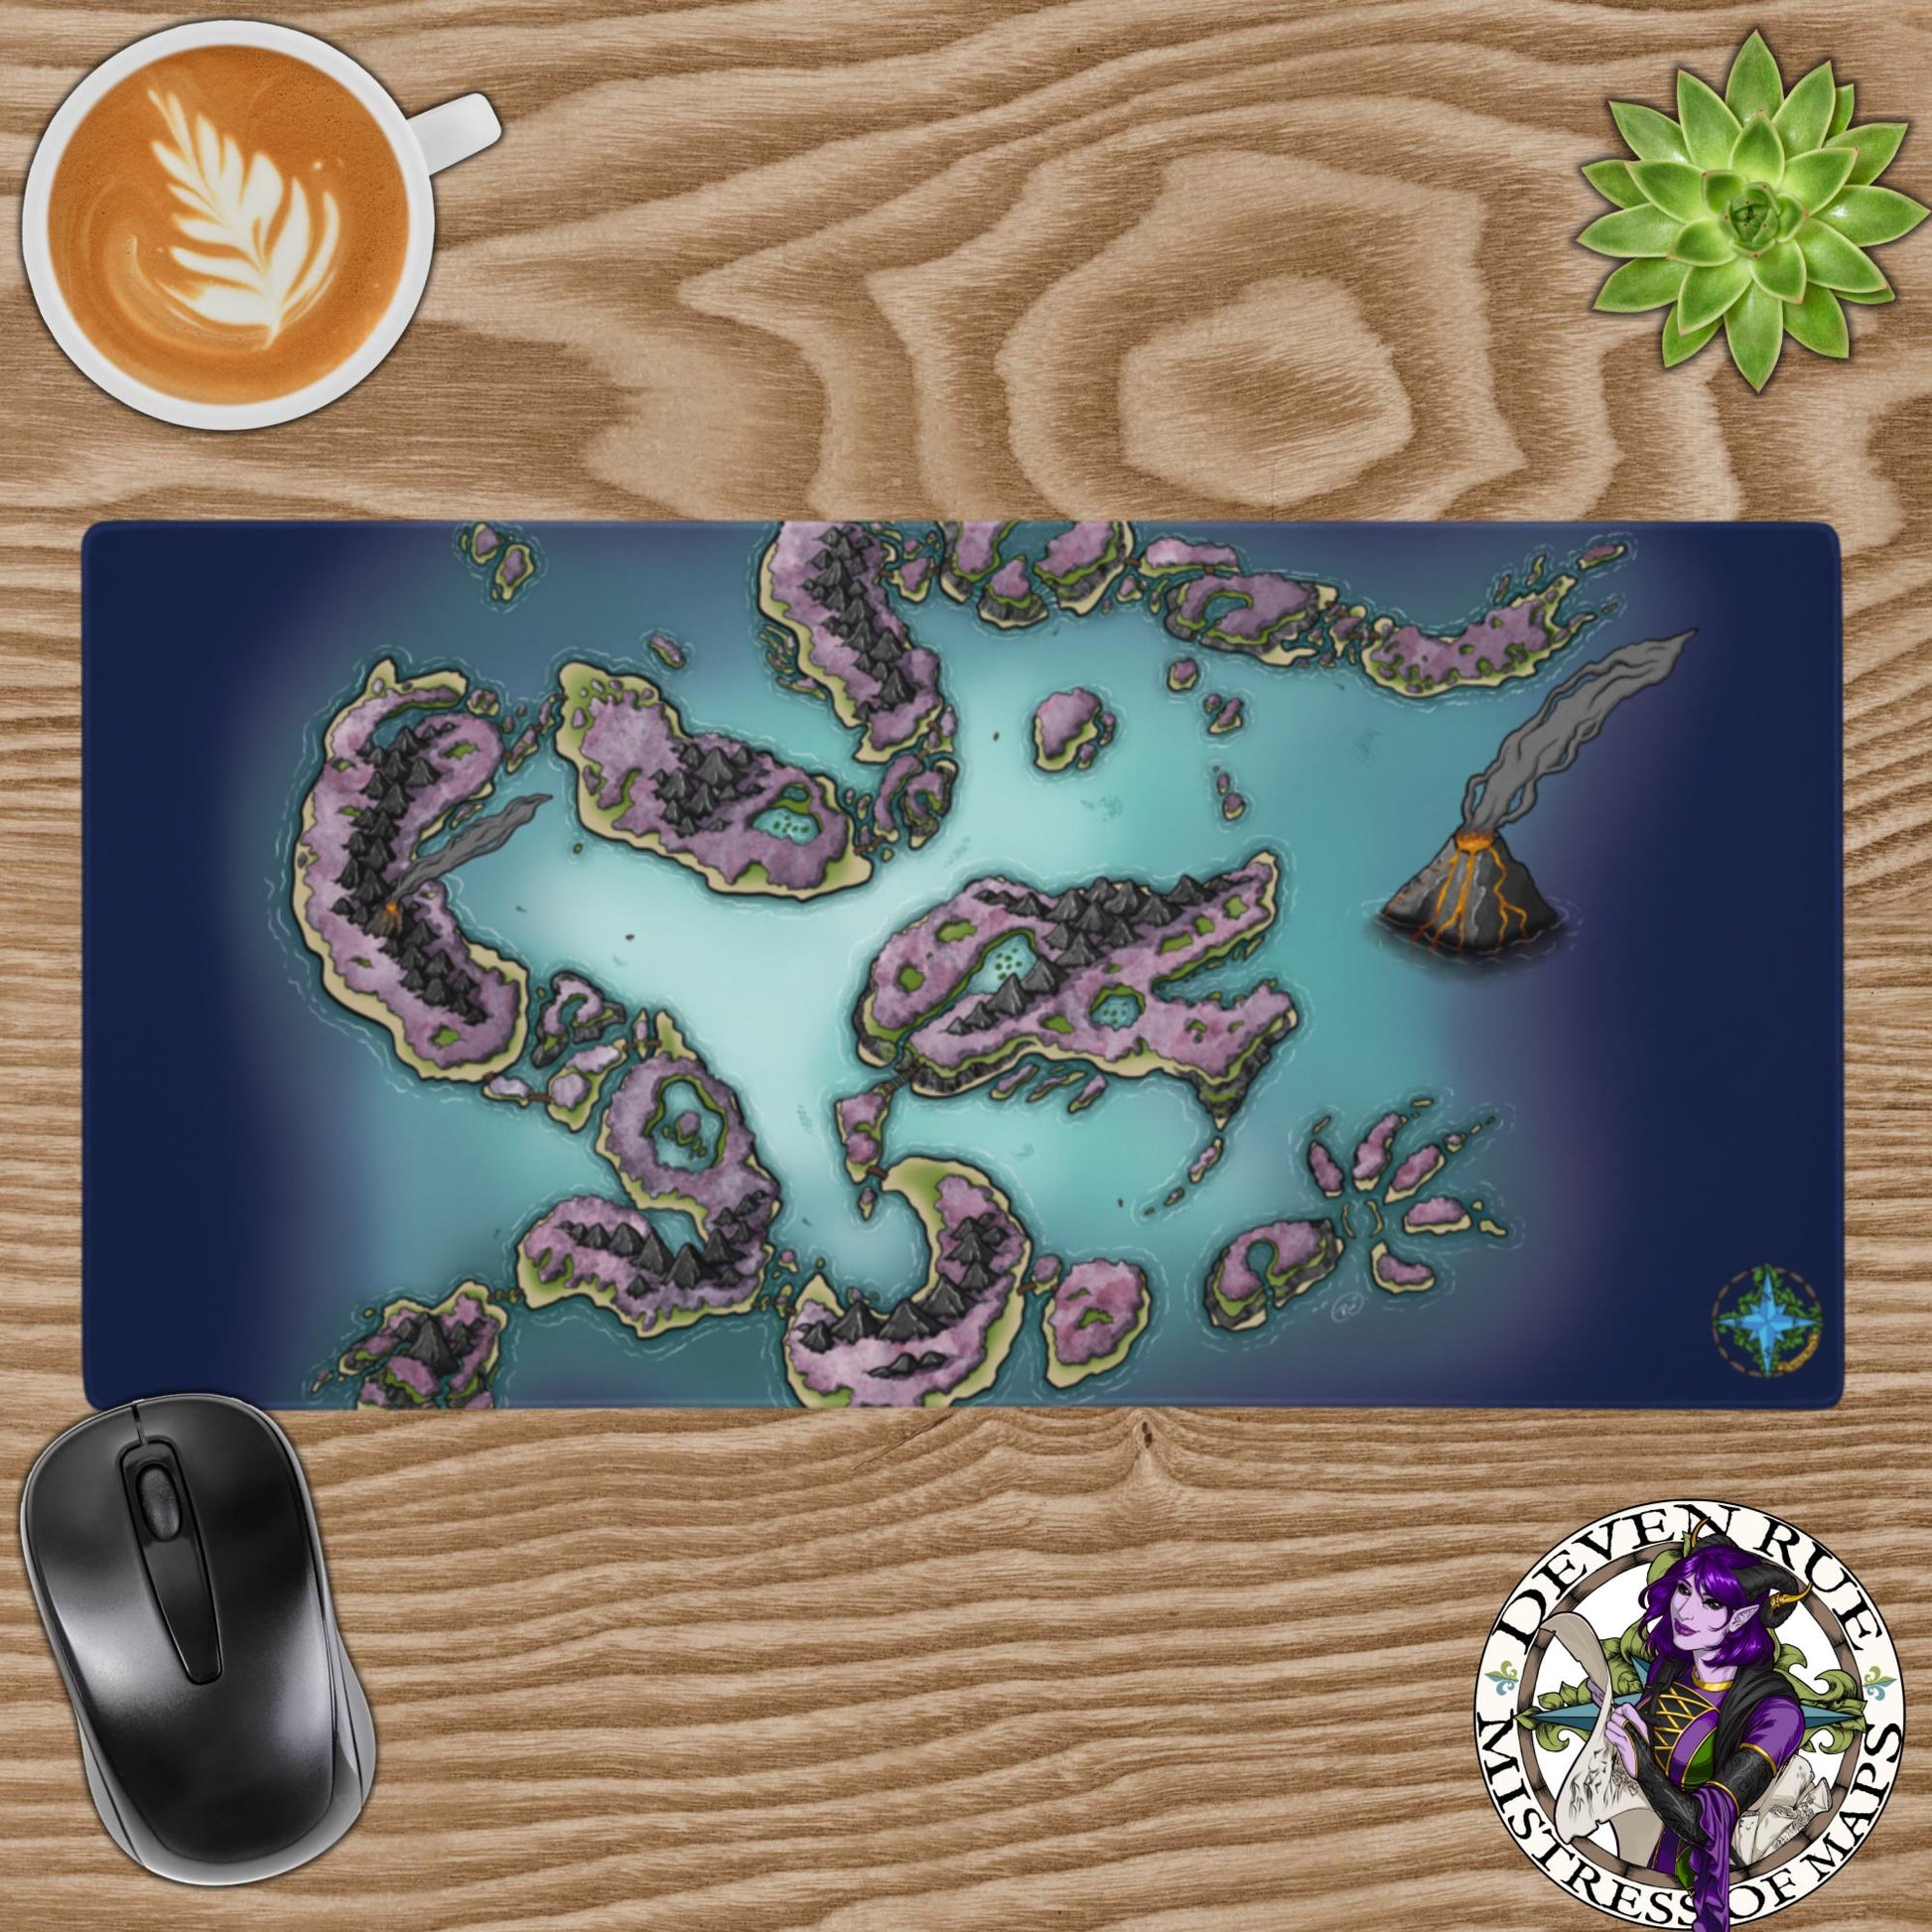 A gaming pad with a color map of the Dragon Isles by Deven Rue sits on a desk with coffee, a succulent, and a computer mouse.